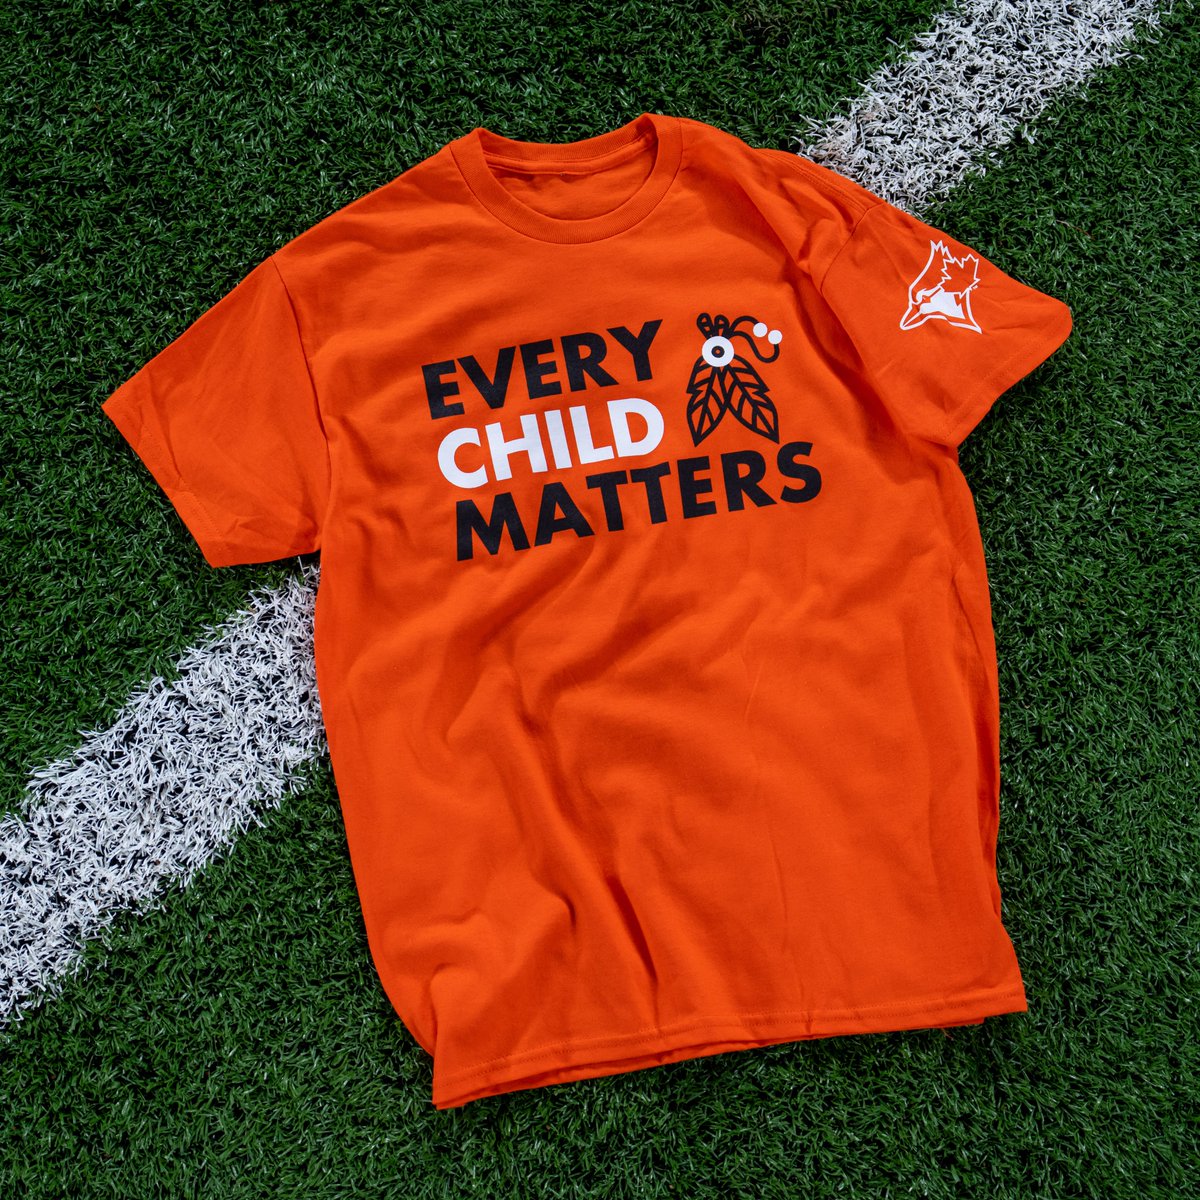 Jays Care Foundation on X: Every Child Matters 🧡 Today, all